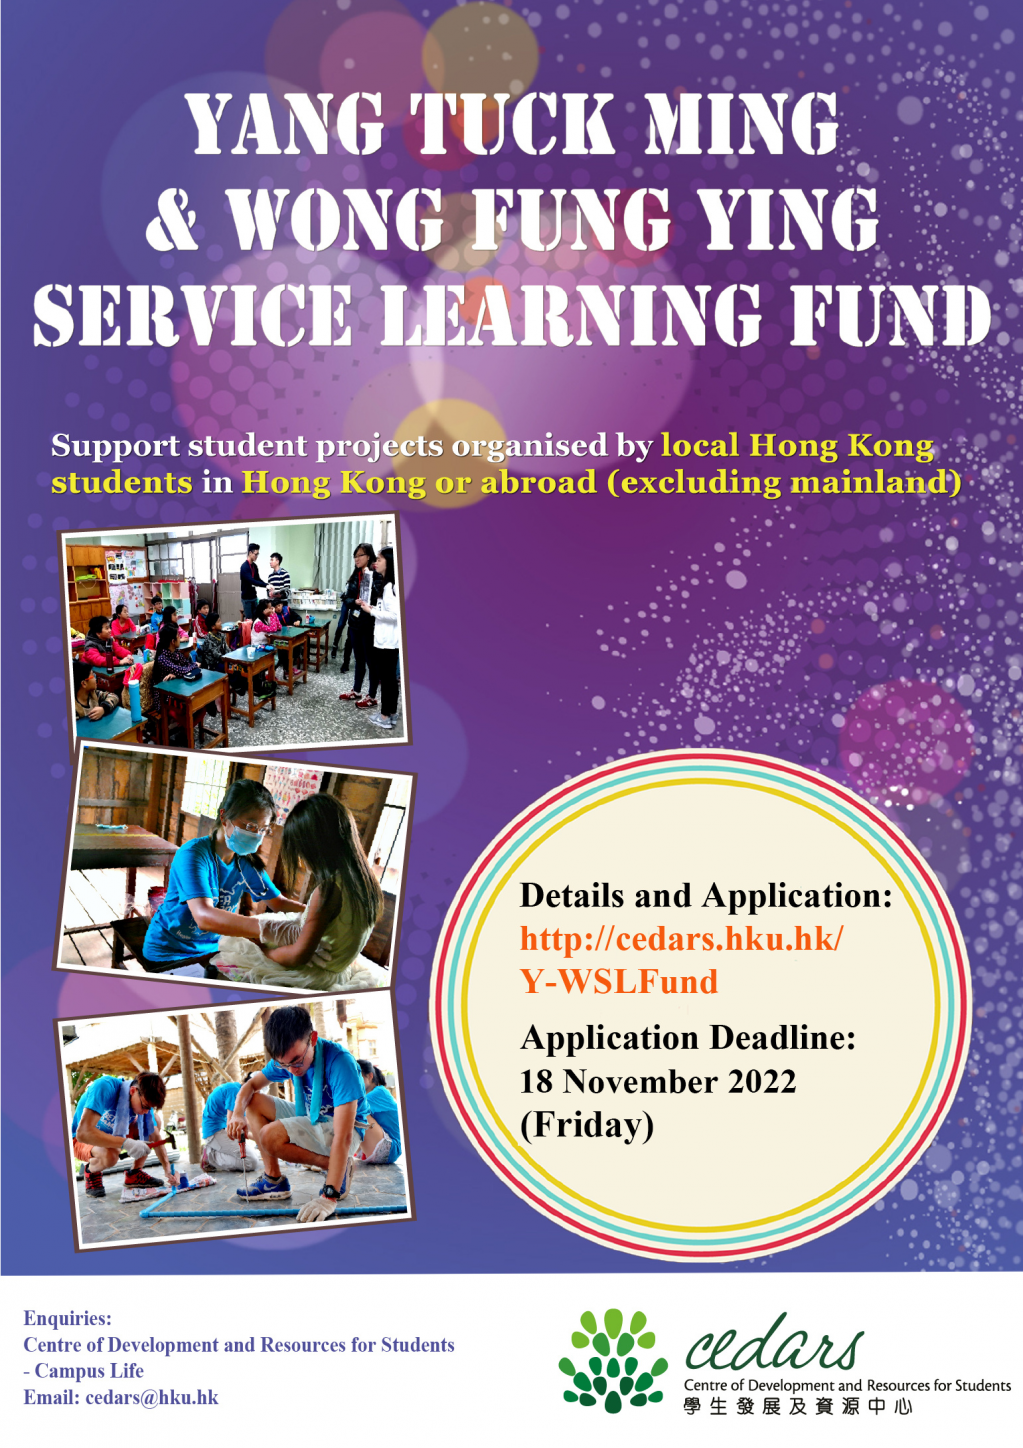 Yang Tuck Ming & Wong Fung Ying Service Learning Fund - Apply Now!